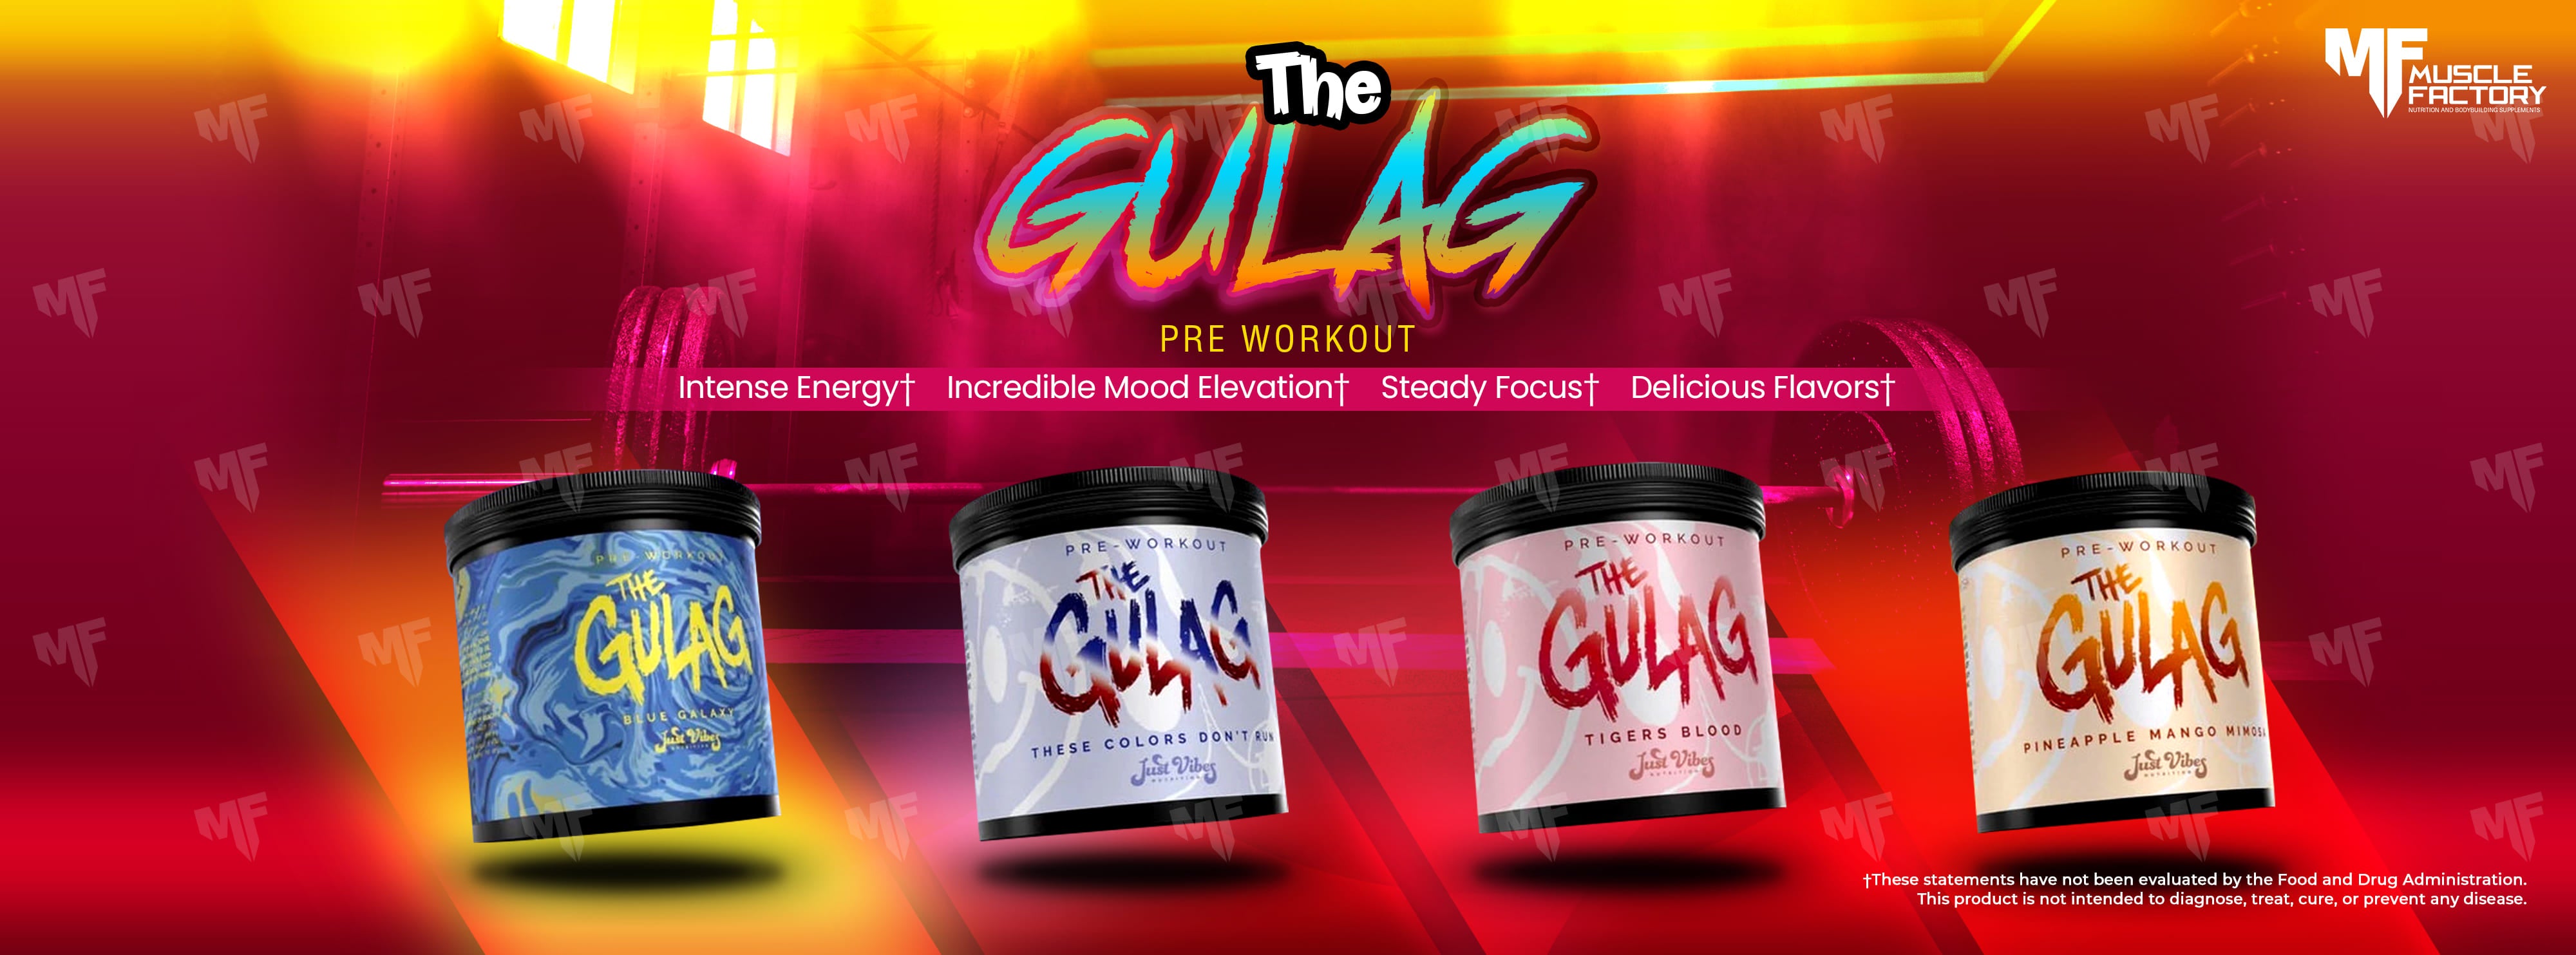 The Gulag Pre-Workout by Just Vibes